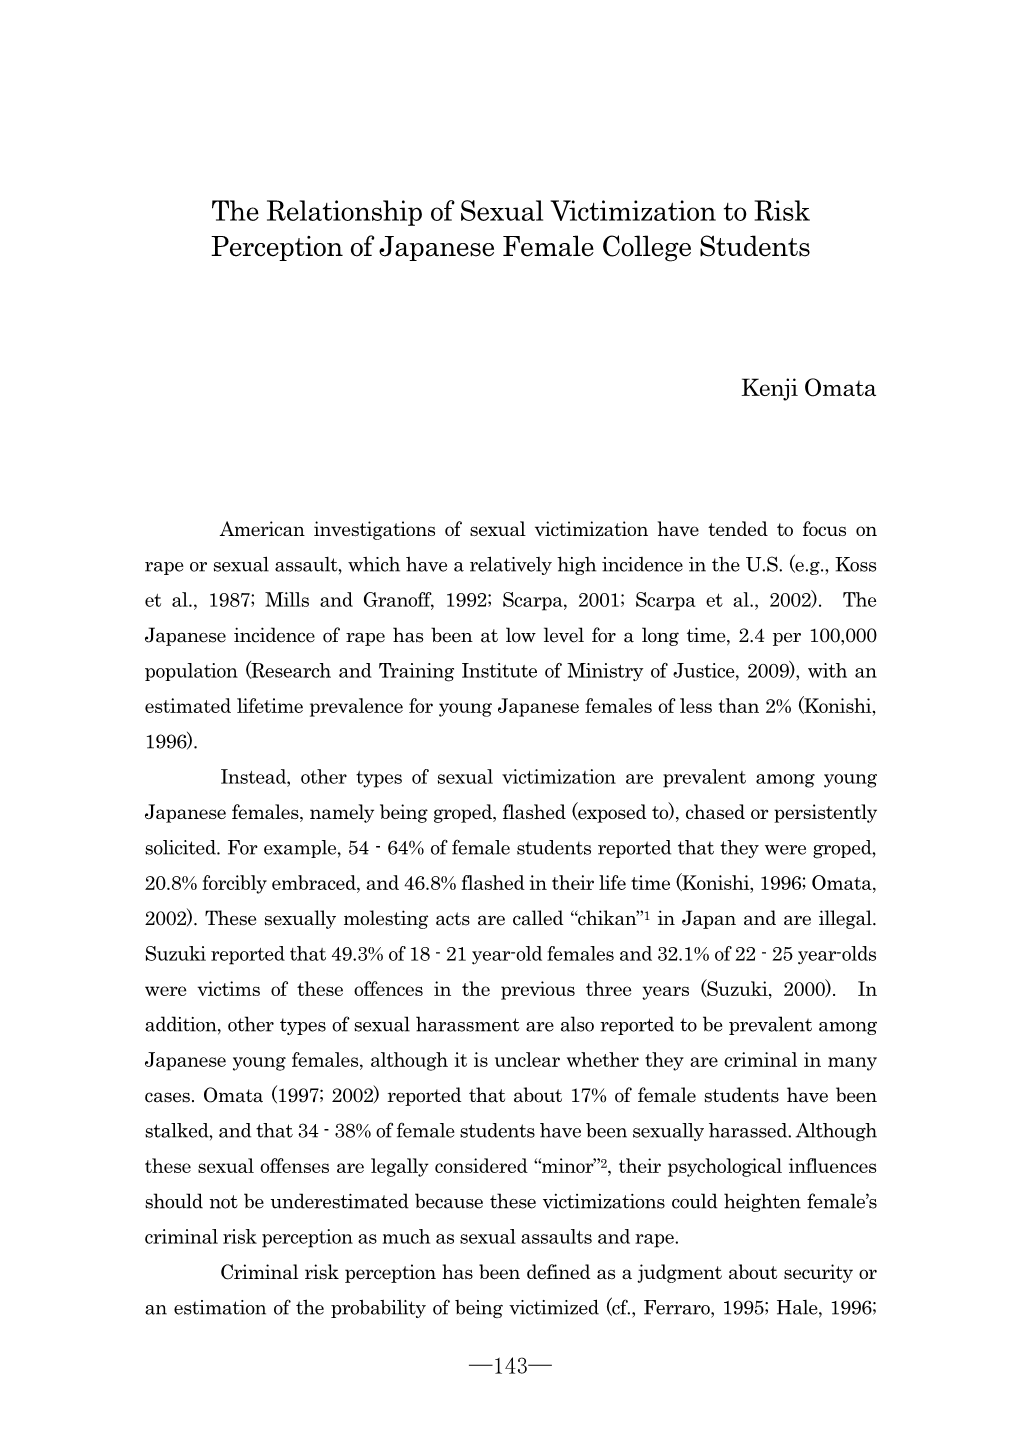 The Relationship of Sexual Victimization to Risk Perception of Japanese Female College Students